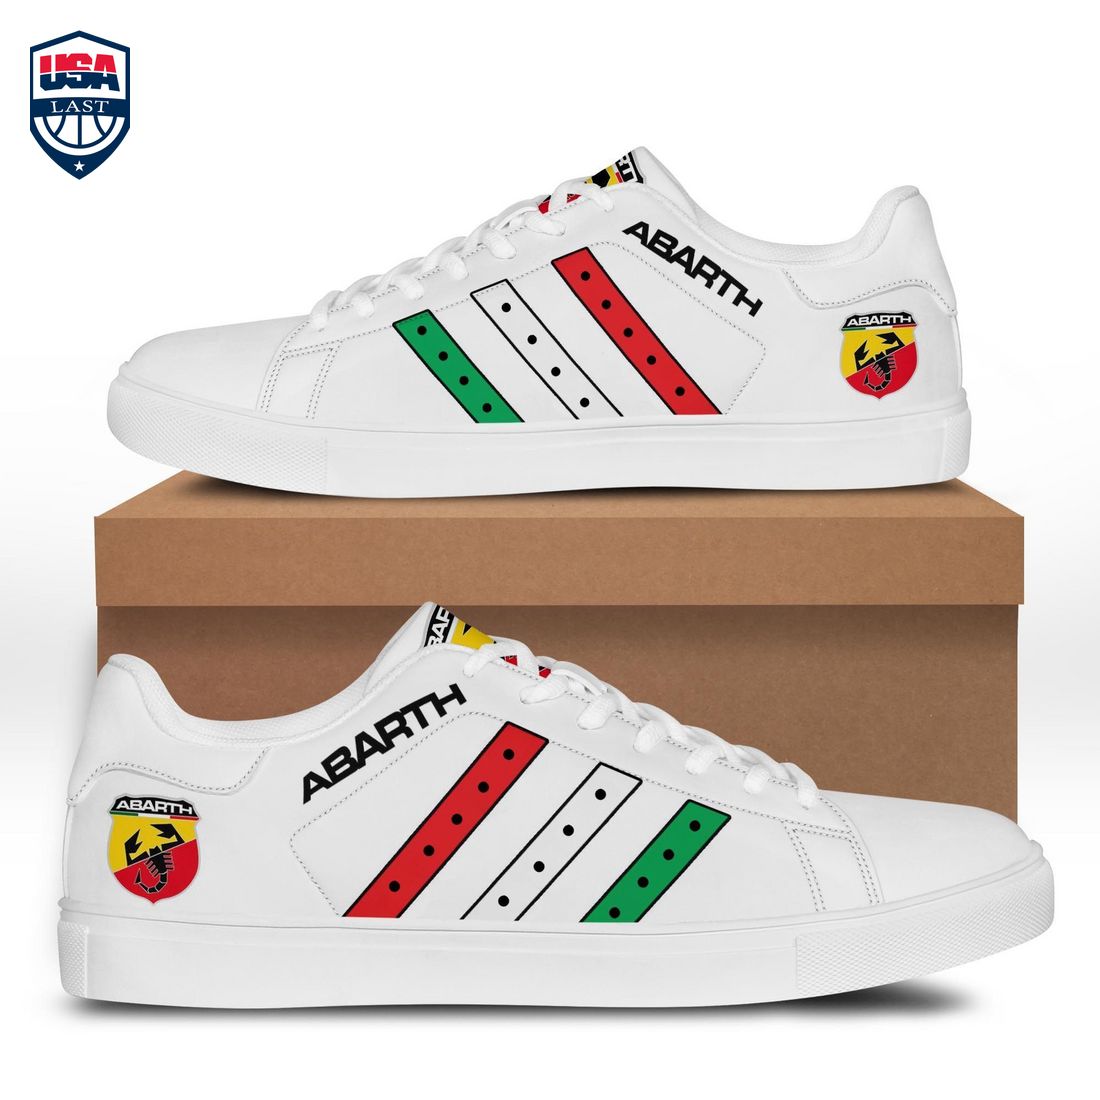 abarth-red-white-green-stripes-style-8-stan-smith-low-top-shoes-1-JdbJA.jpg